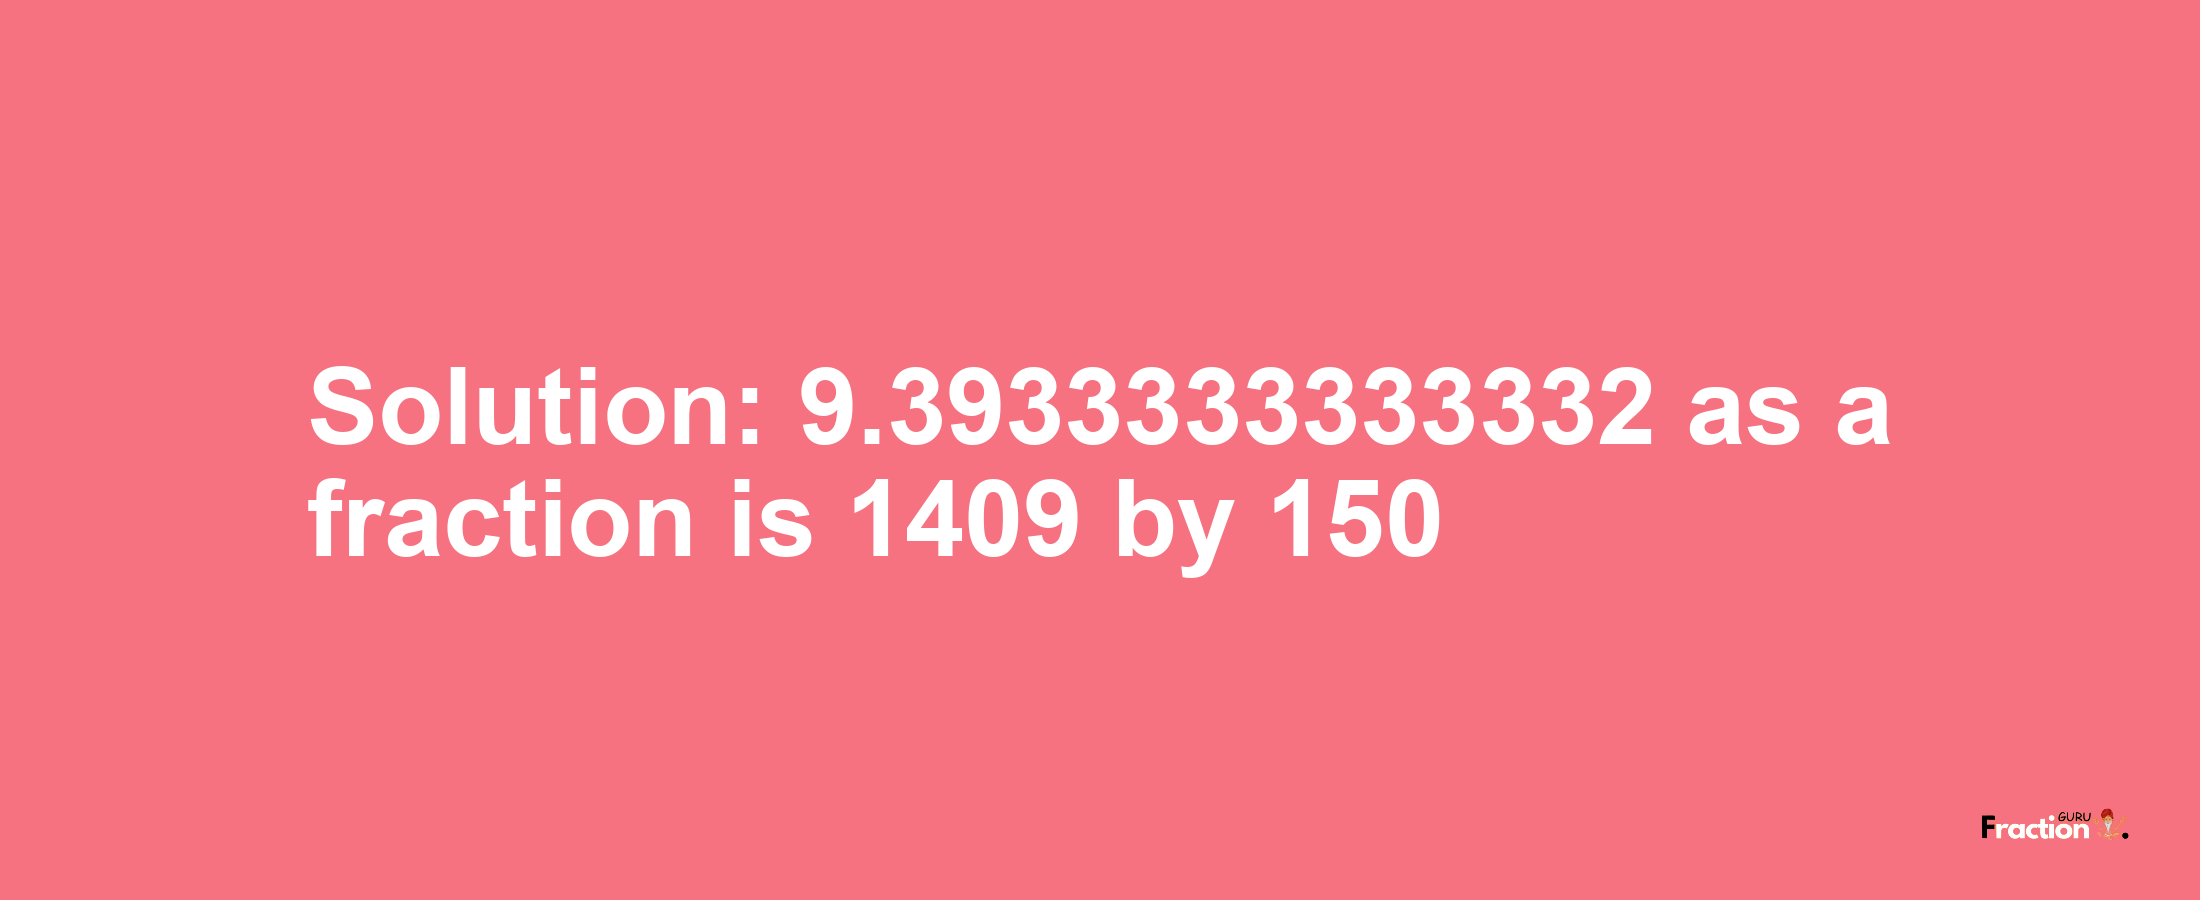 Solution:9.3933333333332 as a fraction is 1409/150